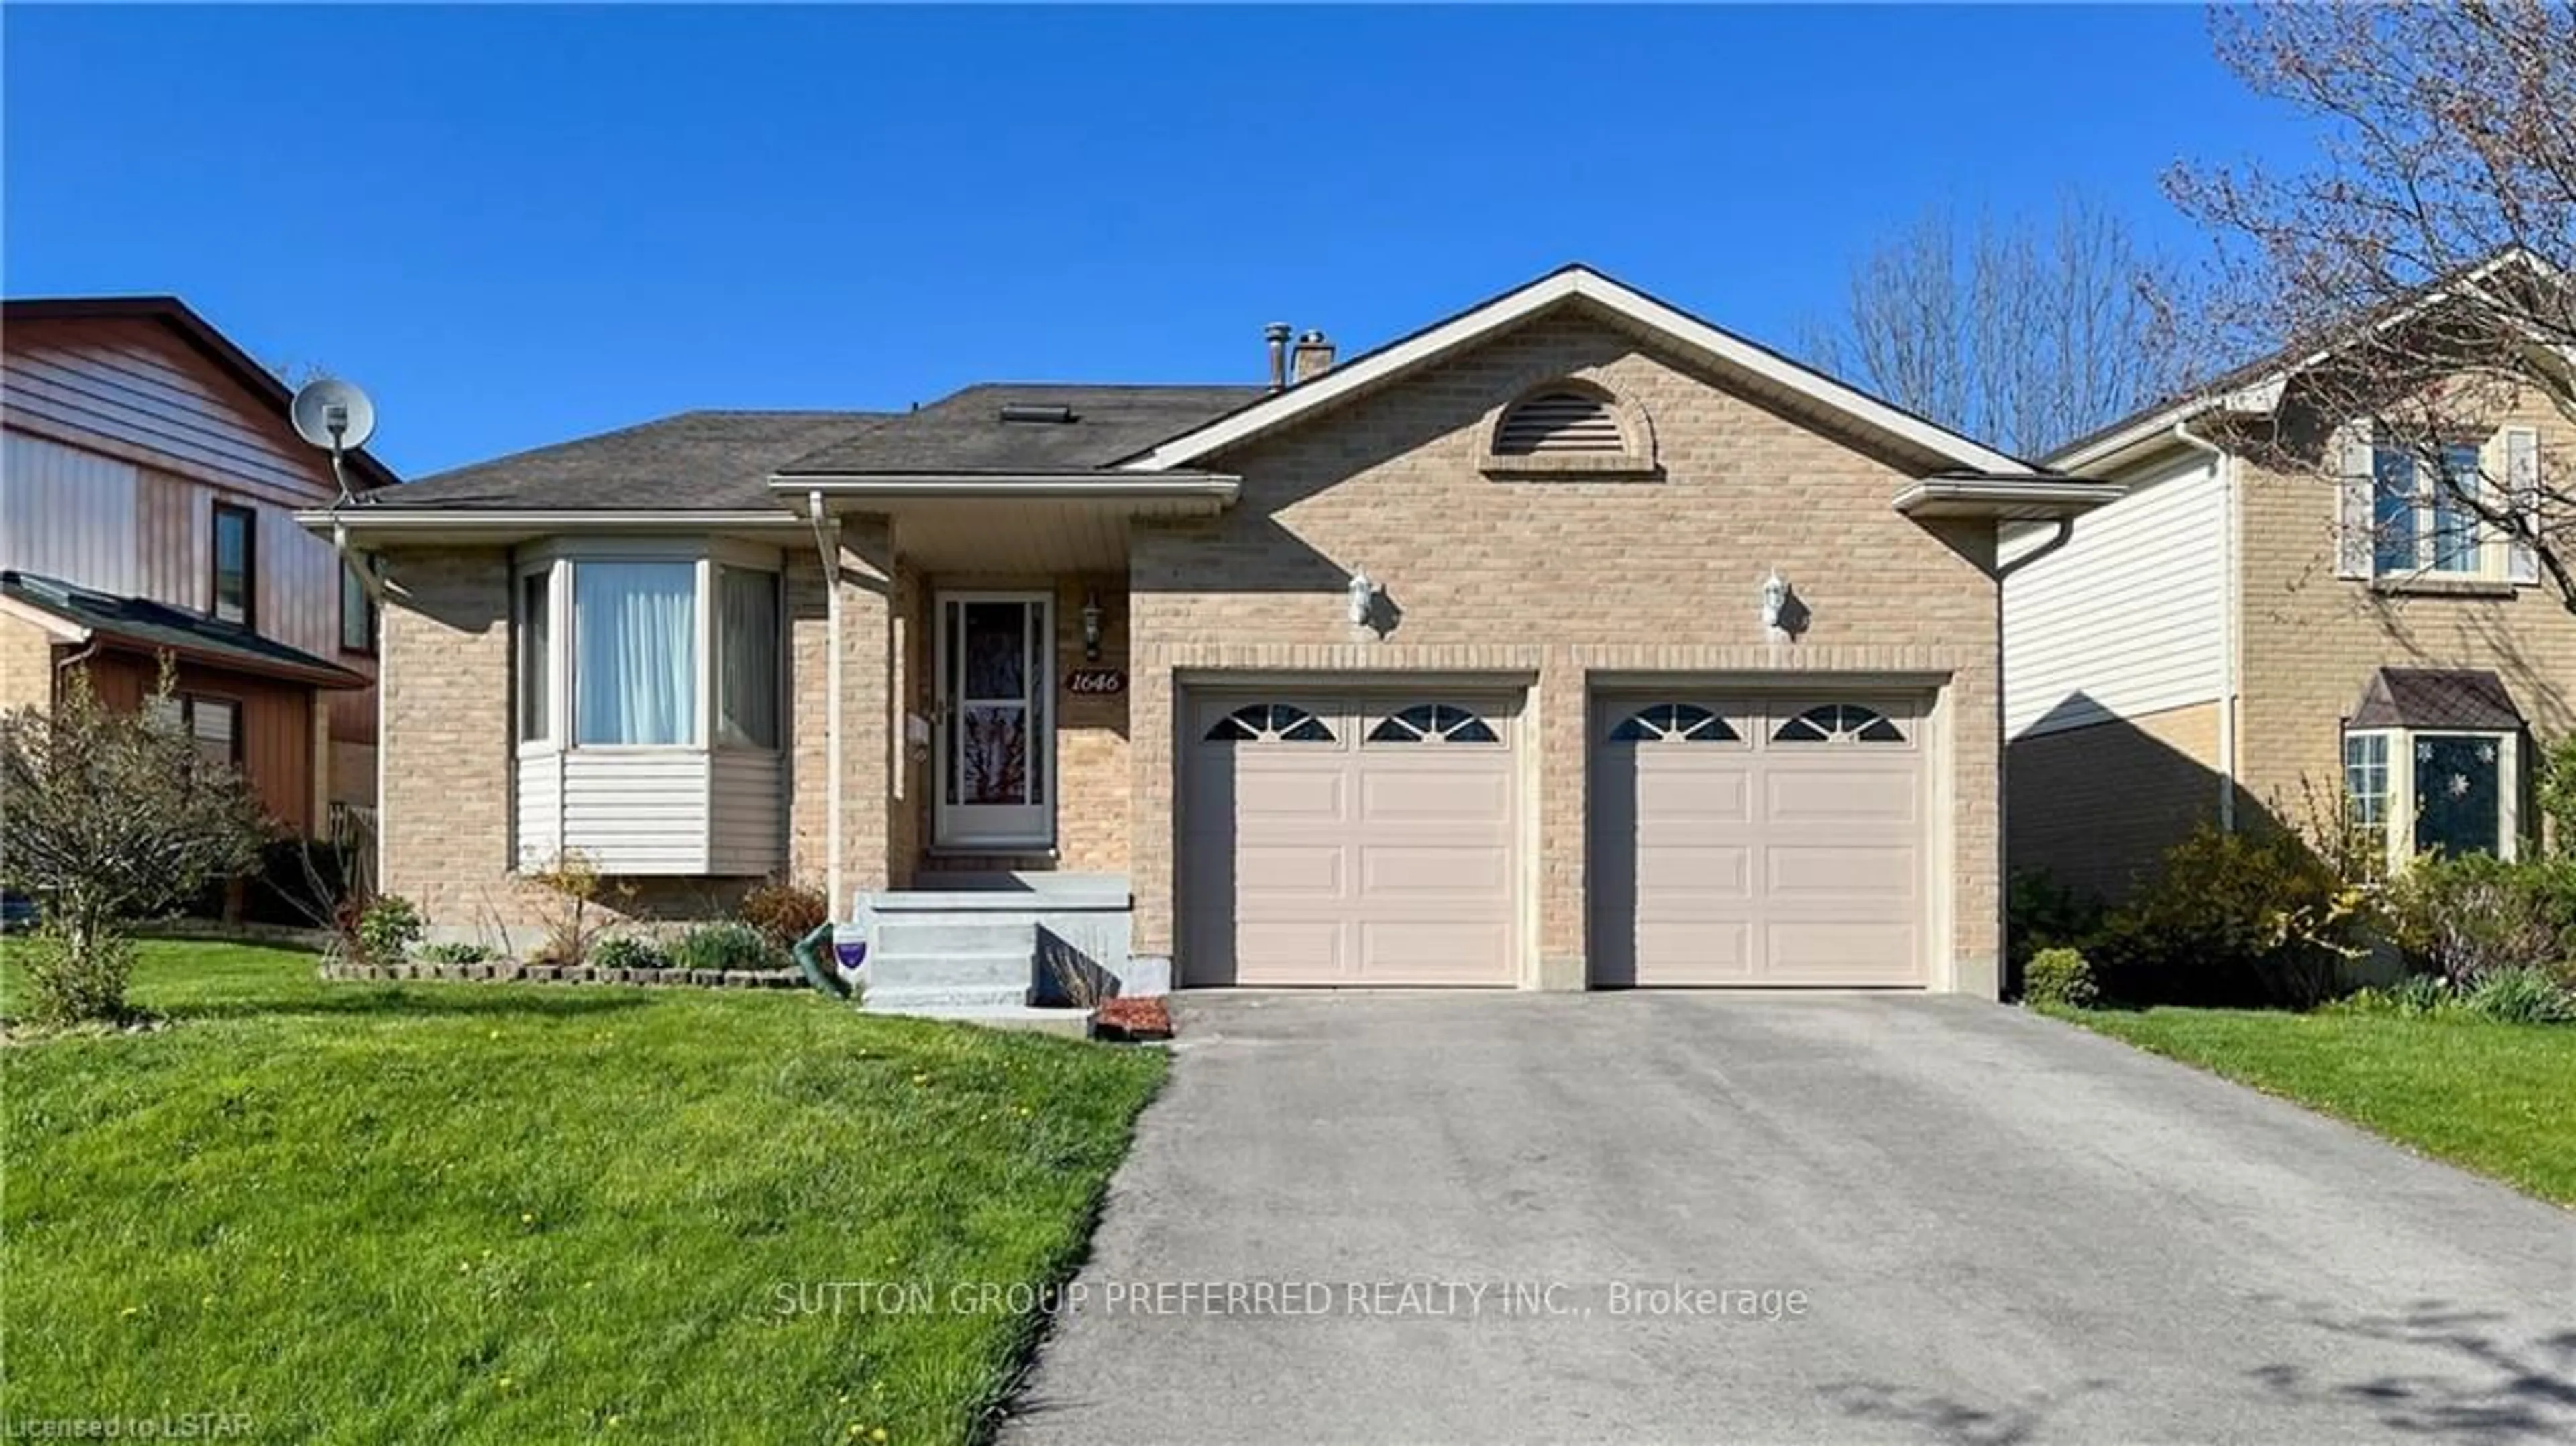 Frontside or backside of a home for 1646 Attawandaron Rd, London Ontario N6G 3M6